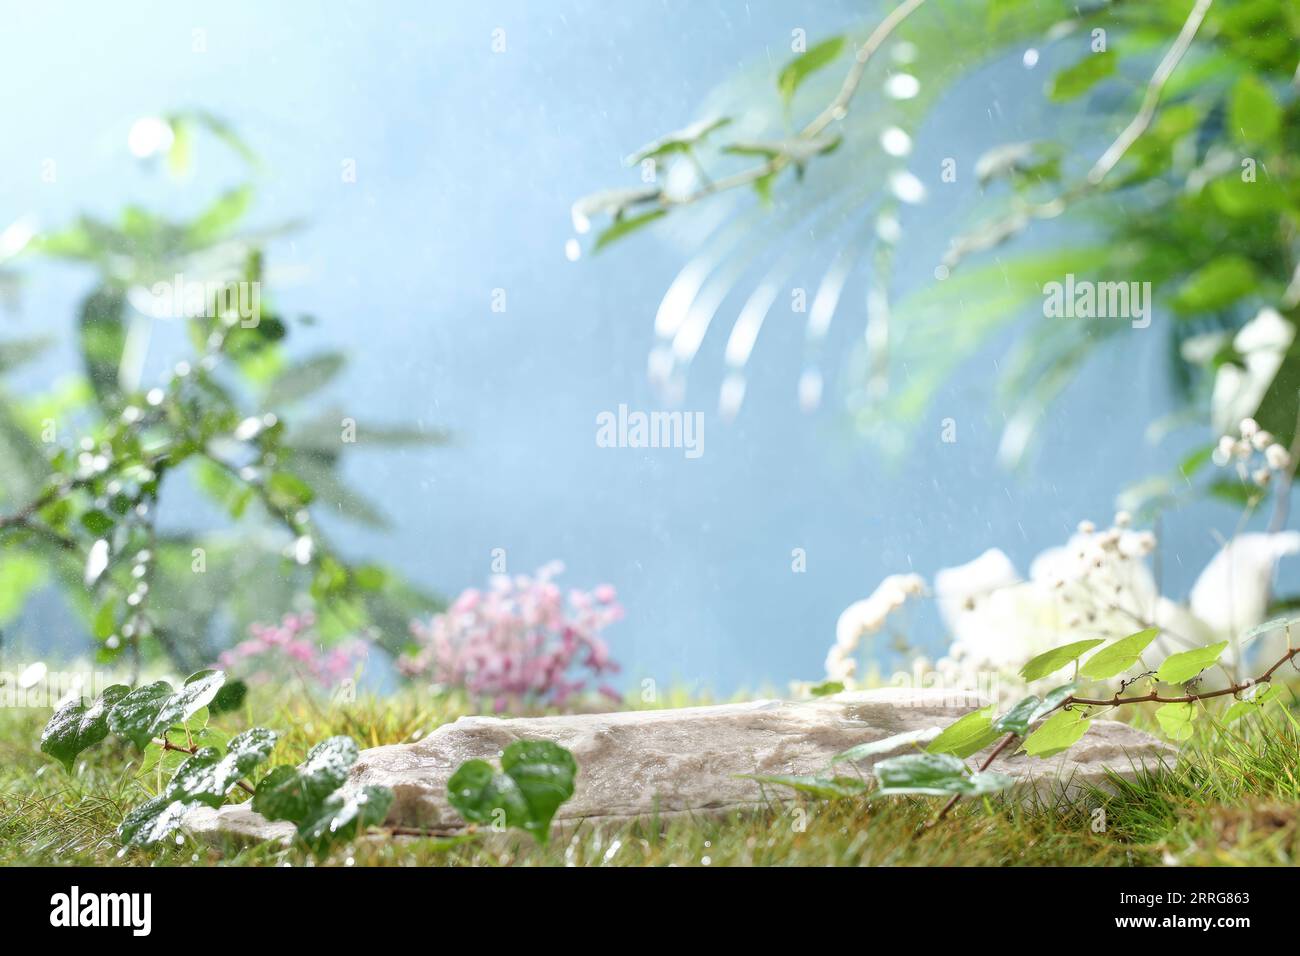 Natural background of flowers, stones and water to display products Stock Photo